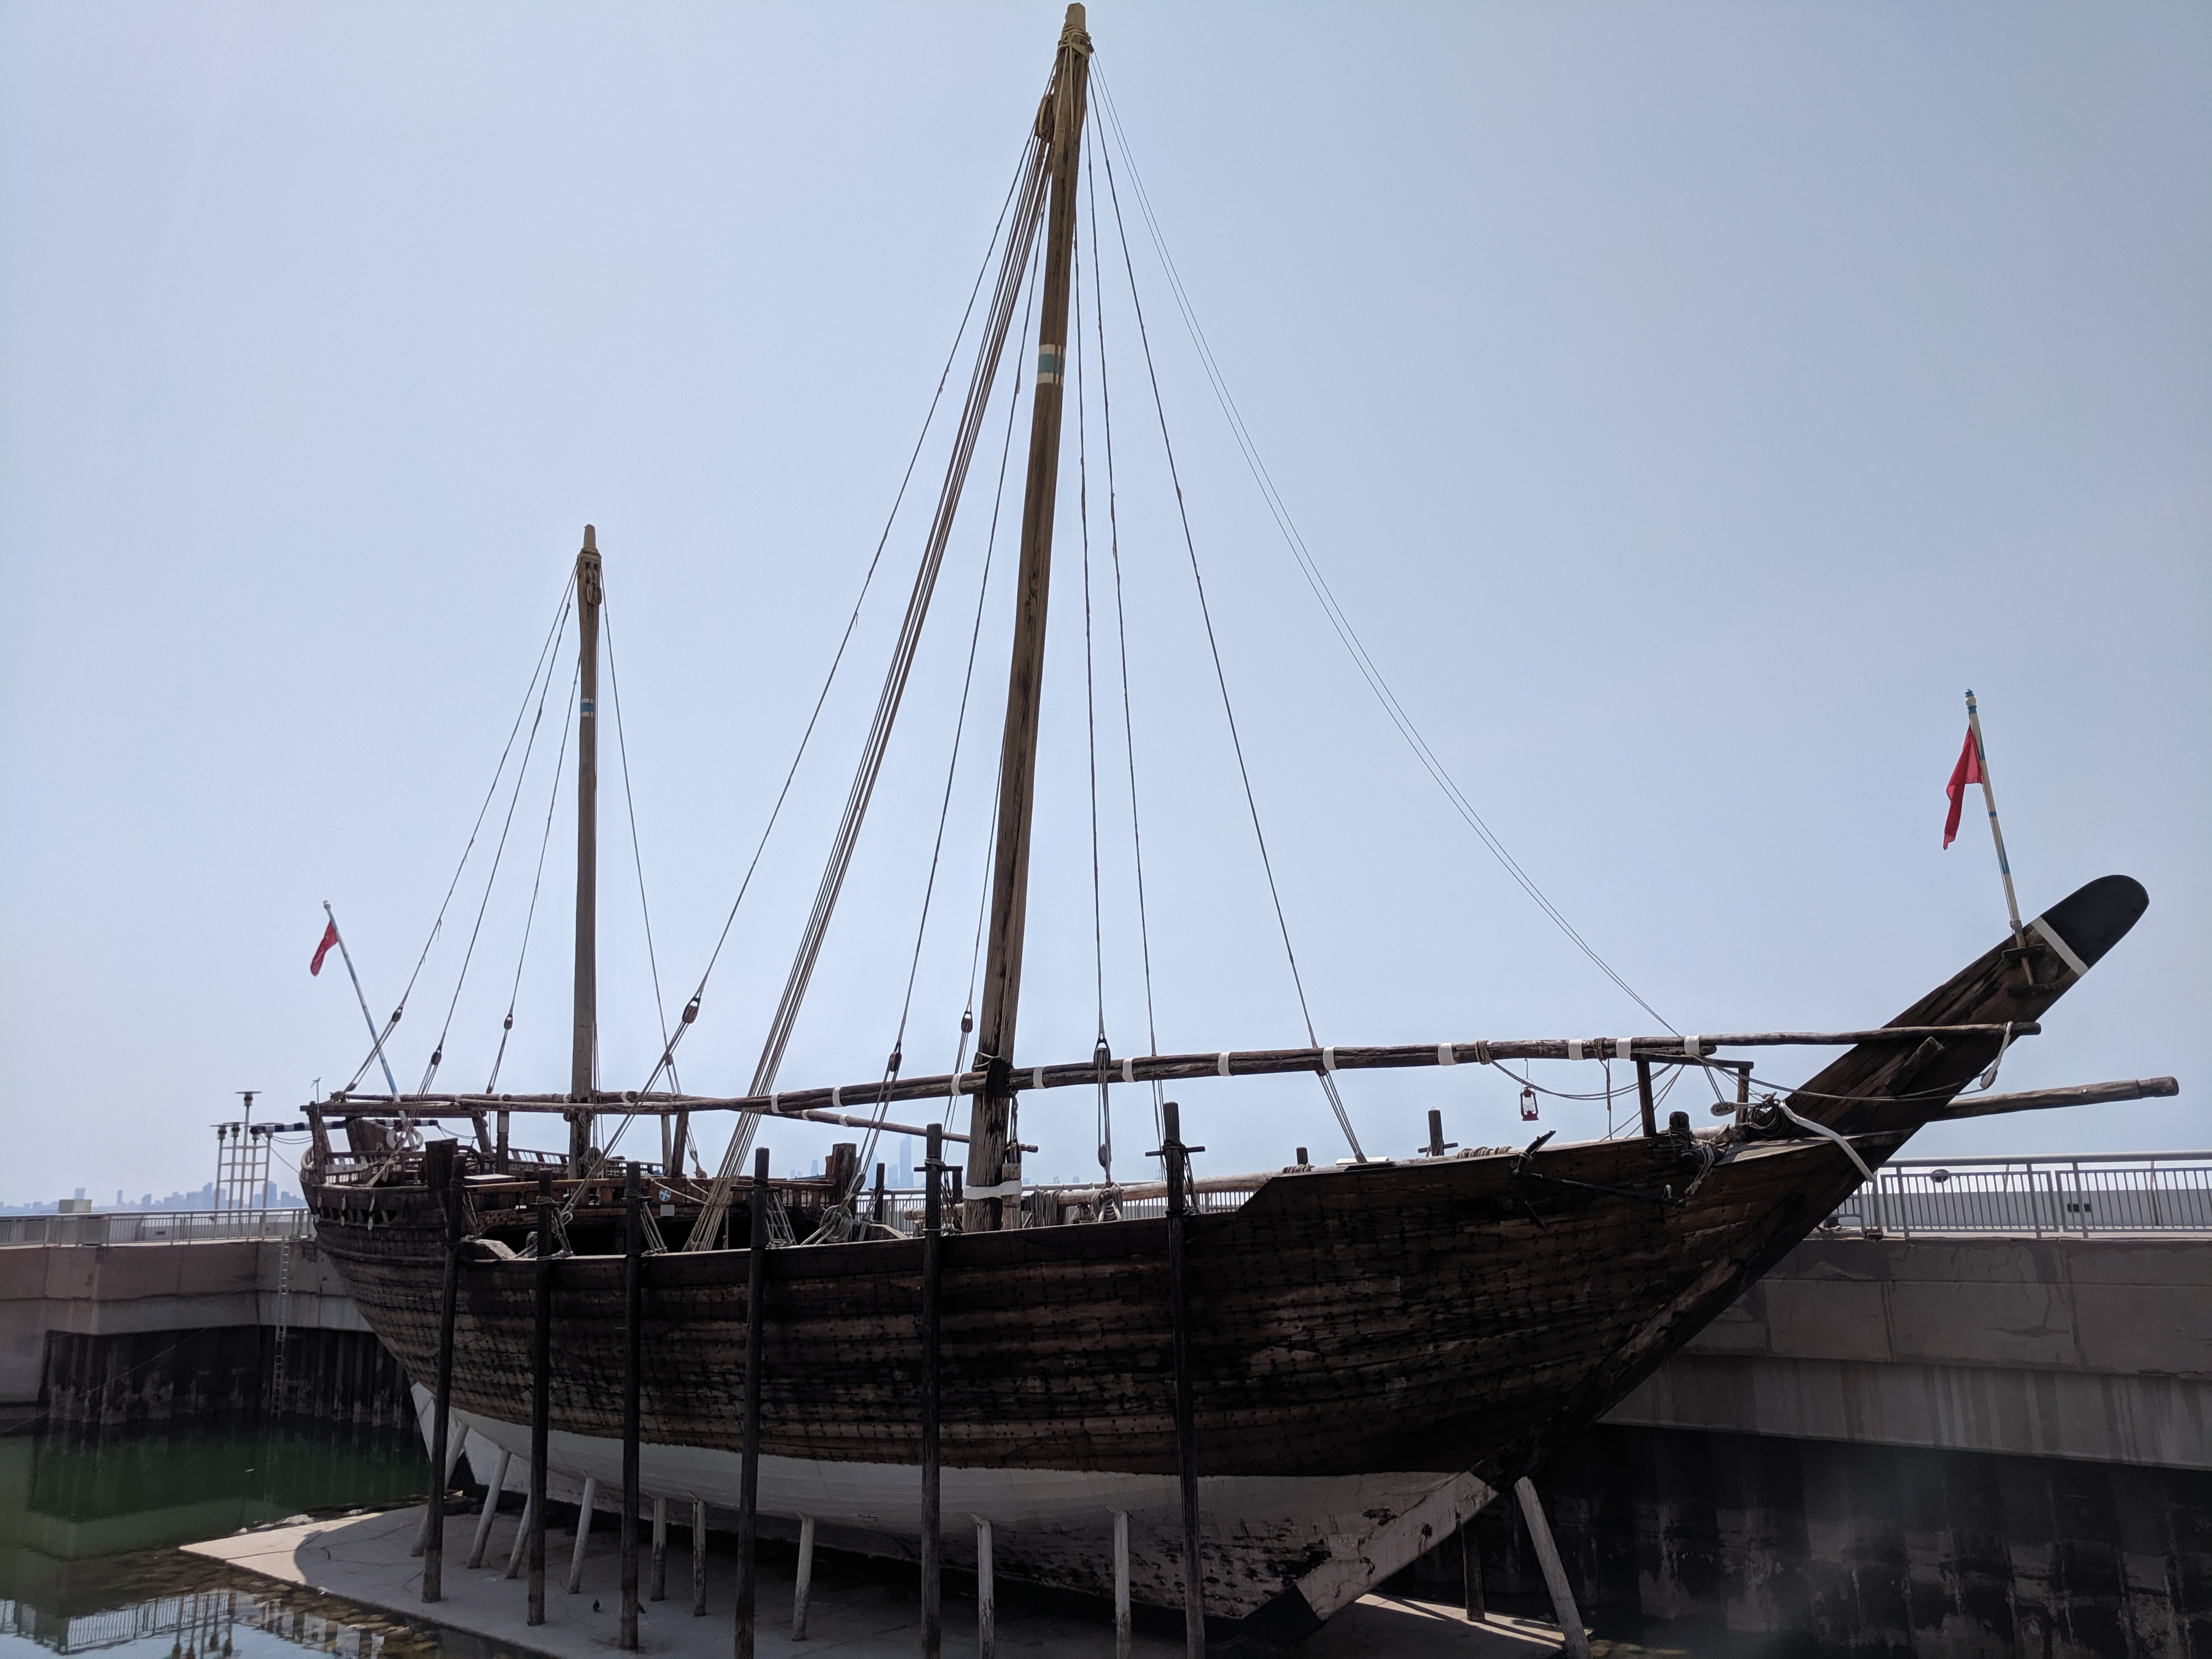 Photograph of a dhow in dry dock.